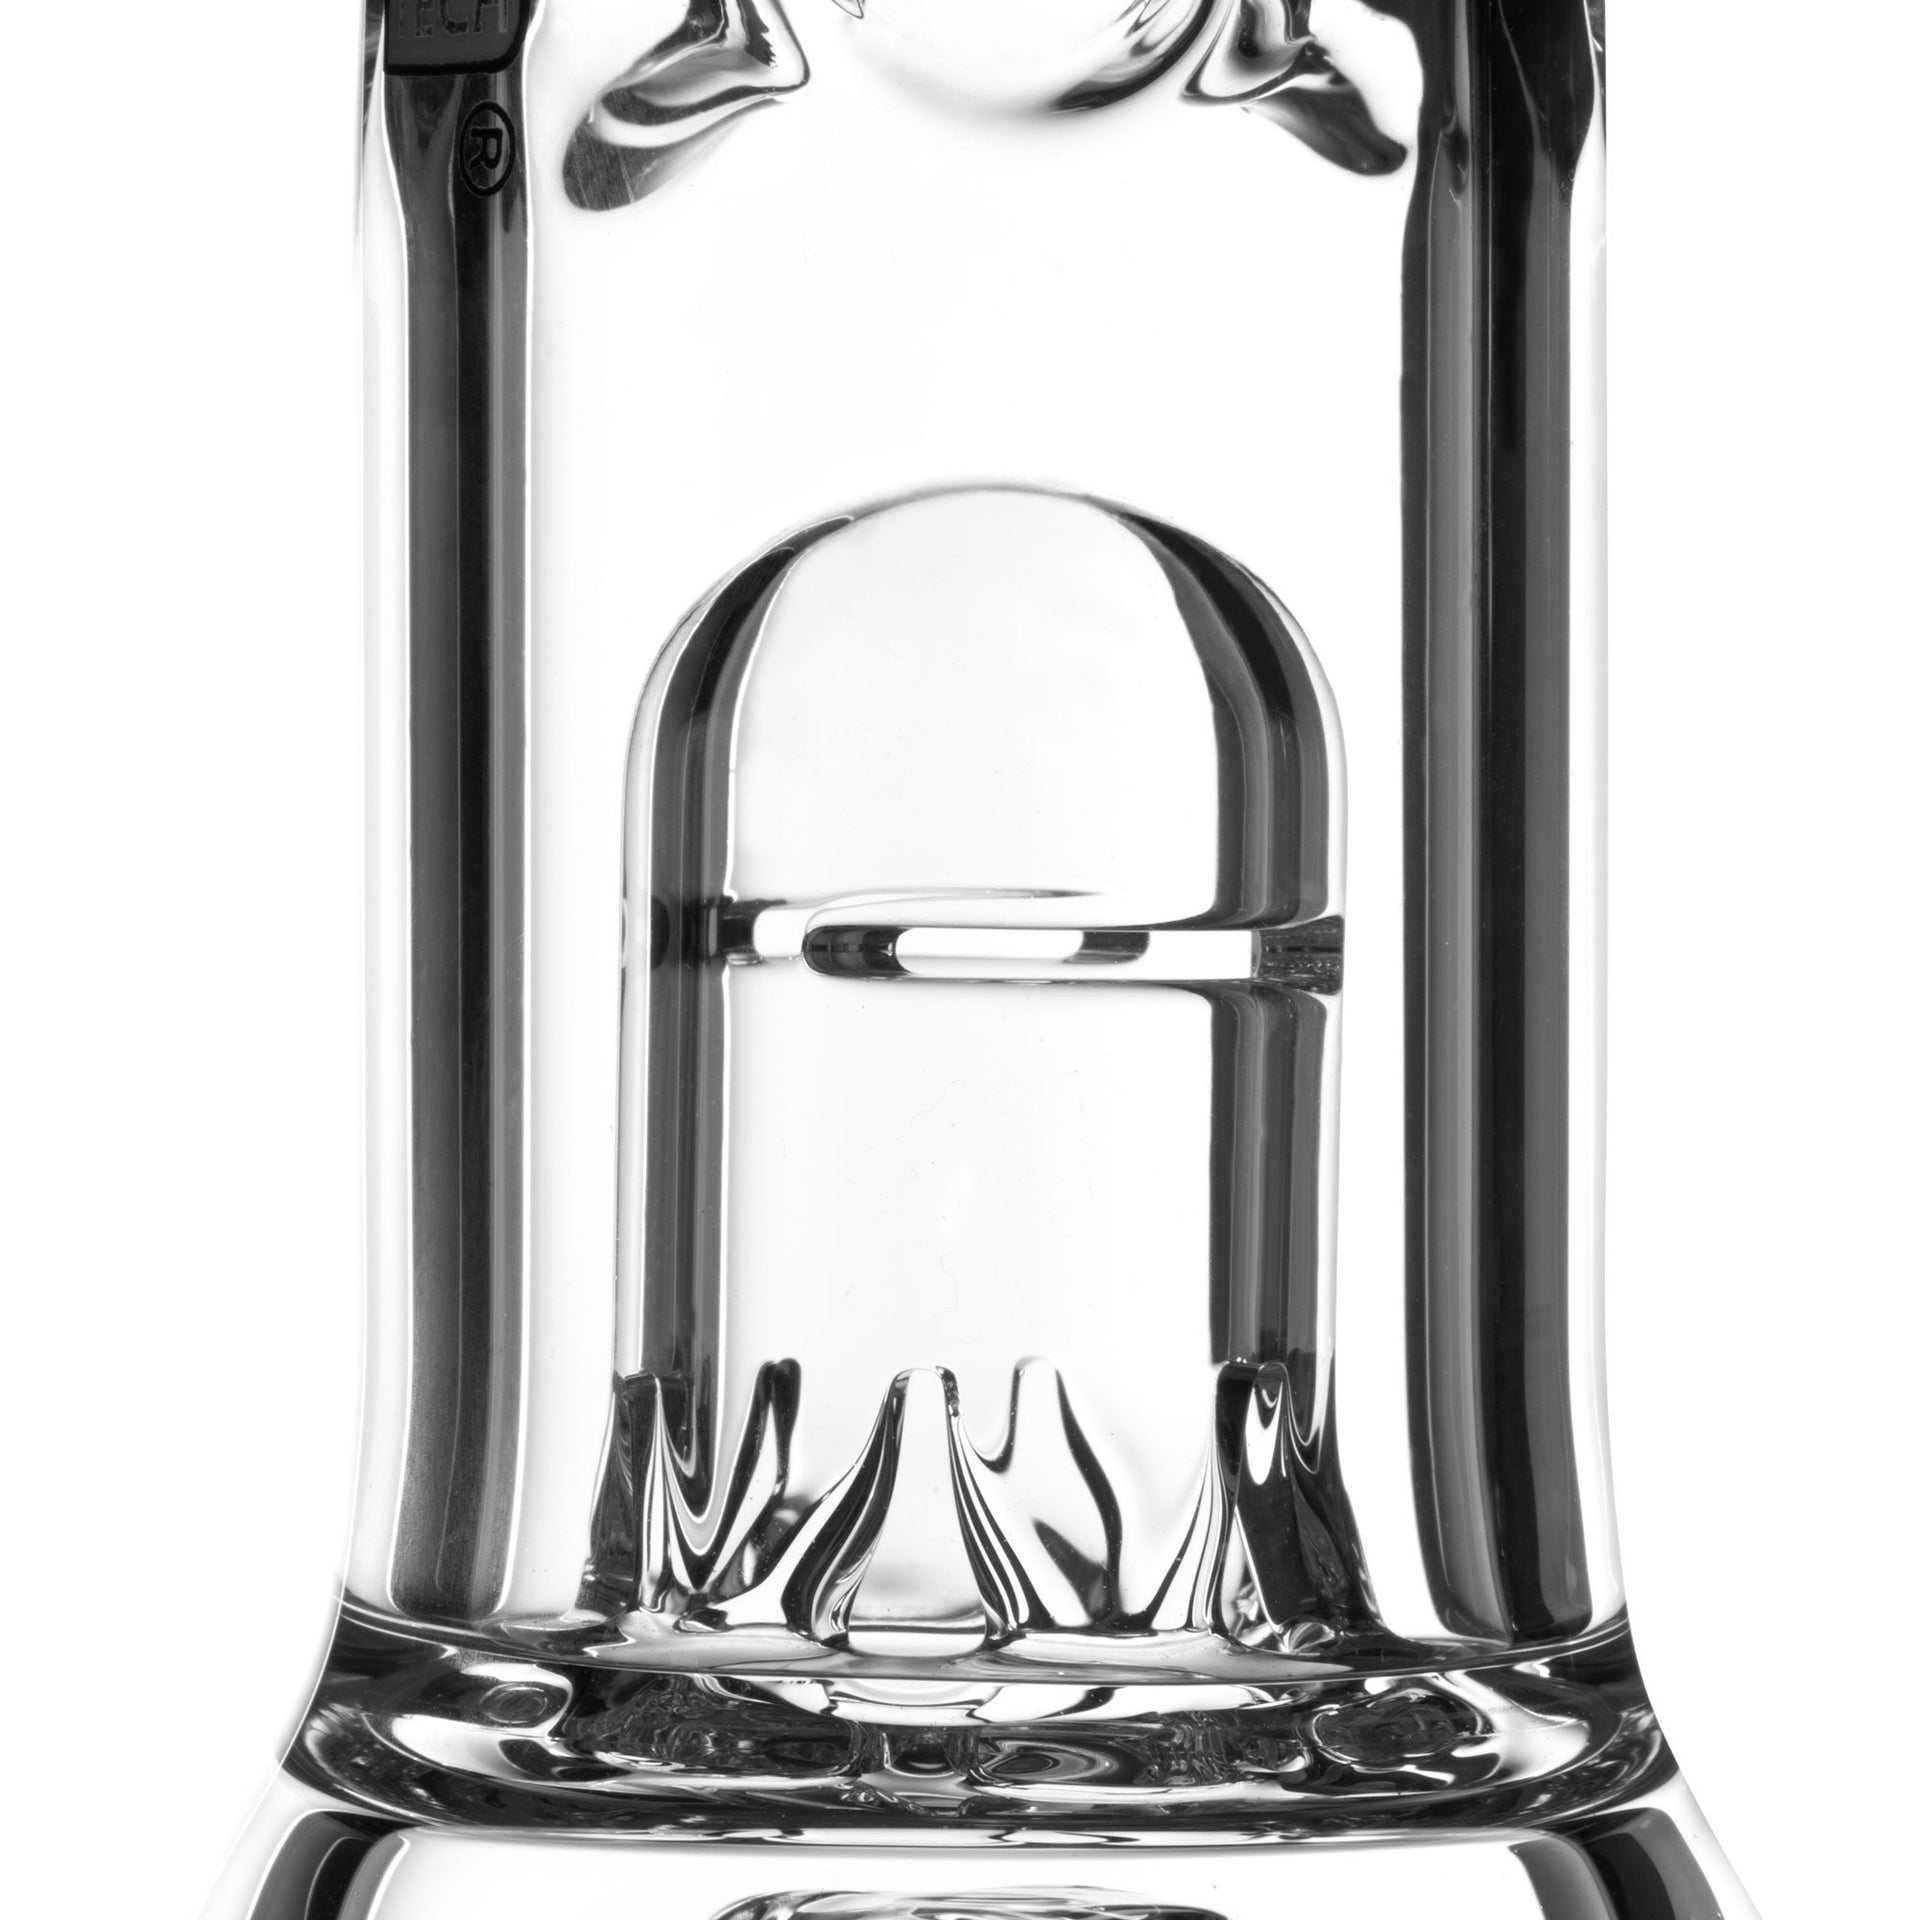 ROOR 14in 4-Arm Tree Perc Bubble Bottom Bong - 420 Science - The most trusted online smoke shop.